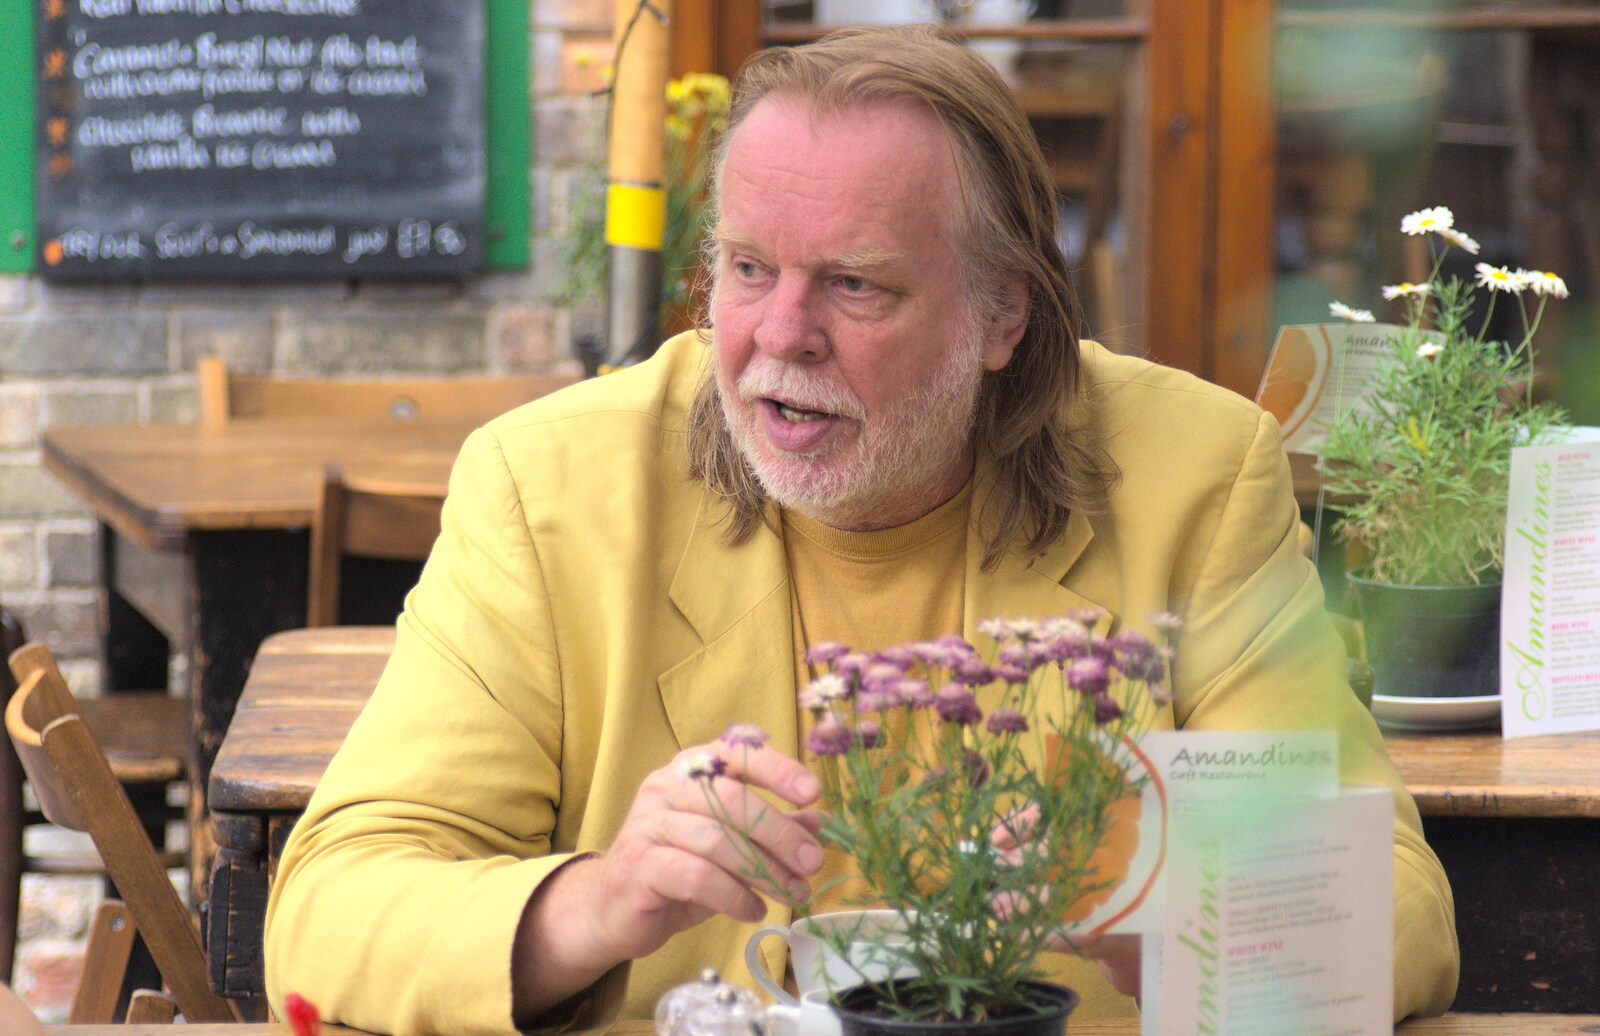 Rick Wakeman tells more stories from An Interview with Rick Wakeman and Other Stories, Diss, Norfolk - 22nd July 2013